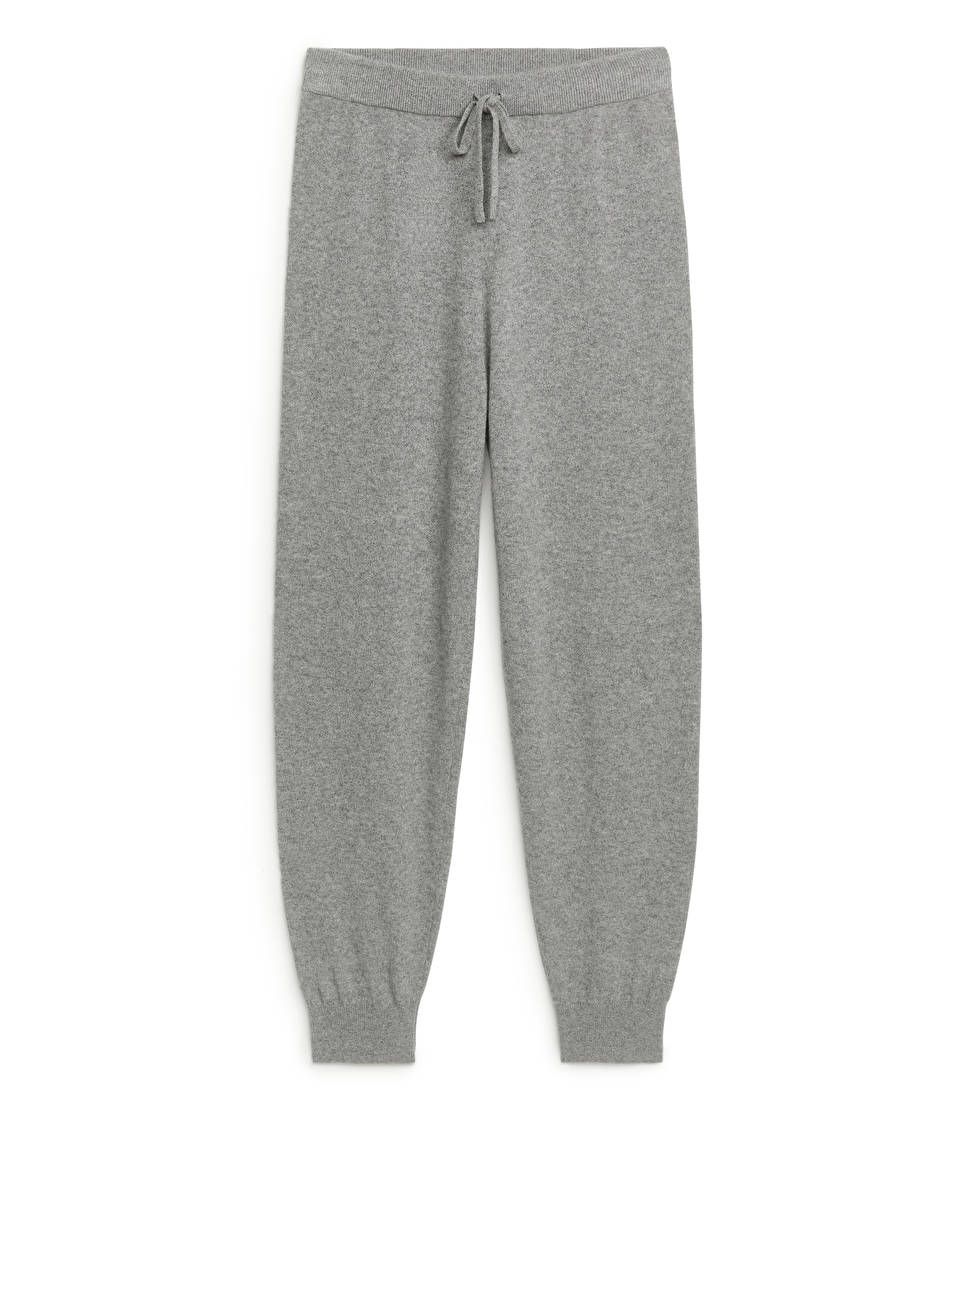 Knitted Cashmere Trousers - Grey - ARKET GB | ARKET (US&UK)